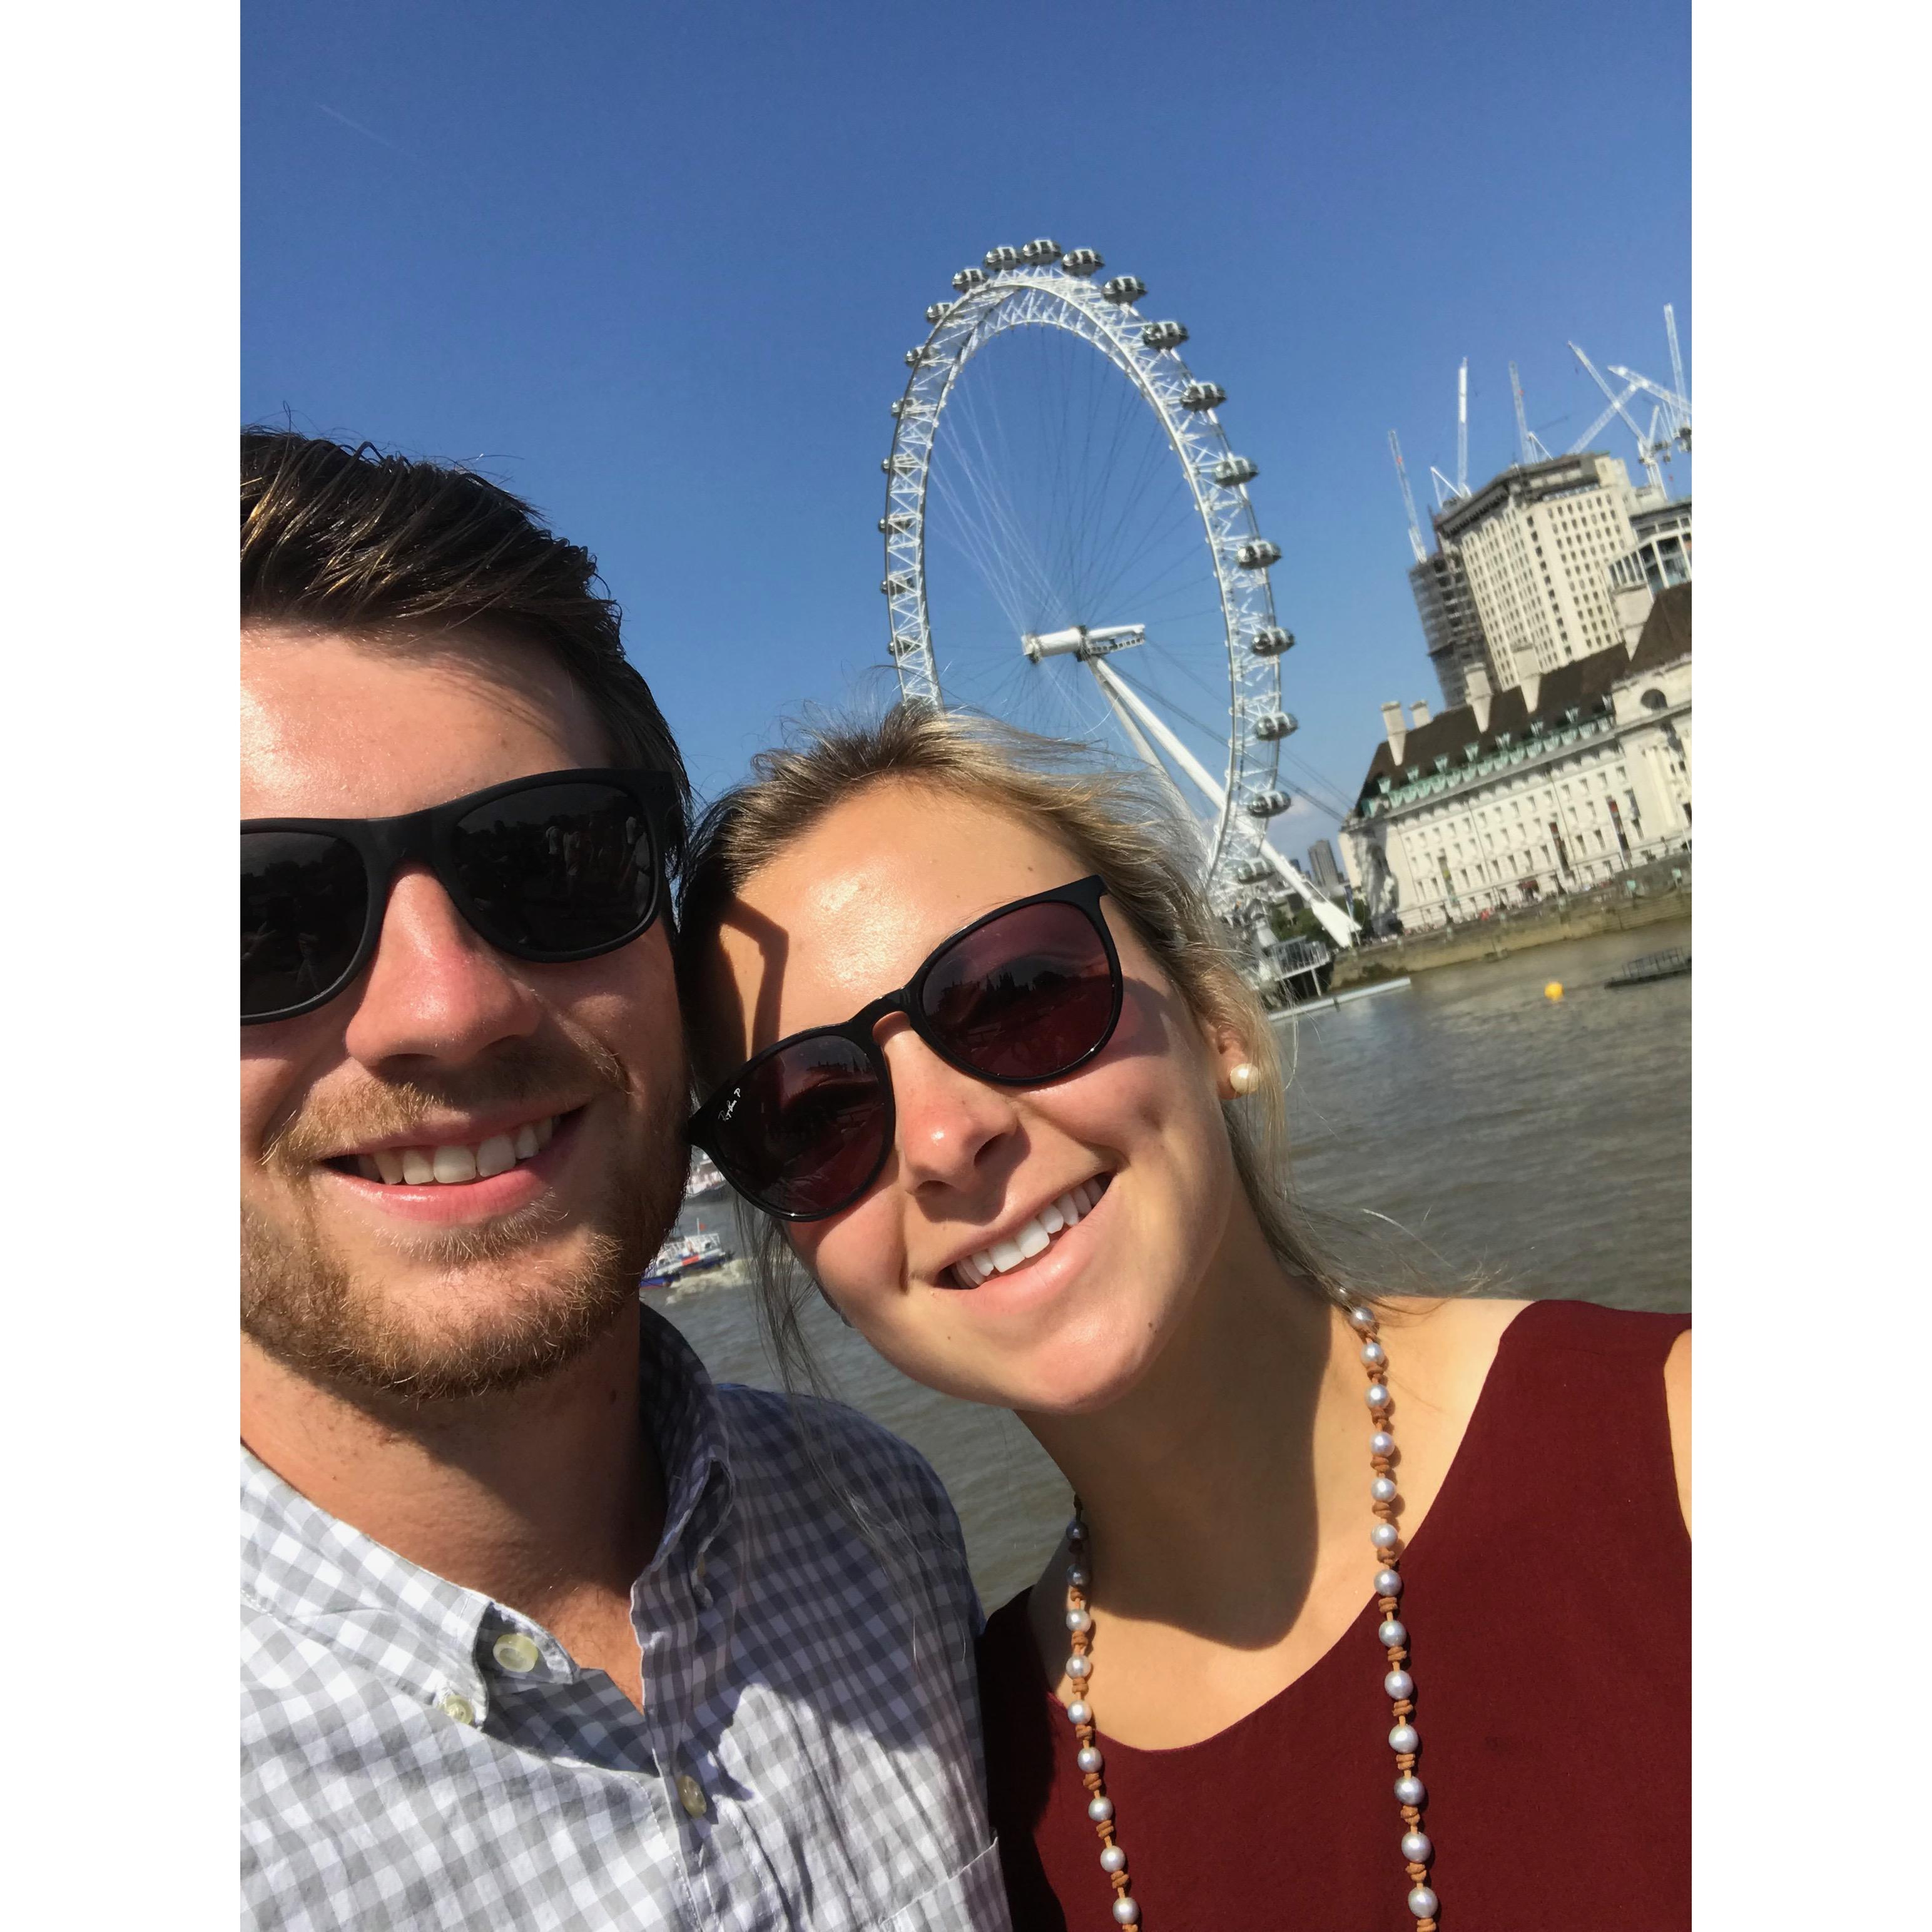 We were lucky enough to explore London after Huw's cousin Lizzy was married in 2018